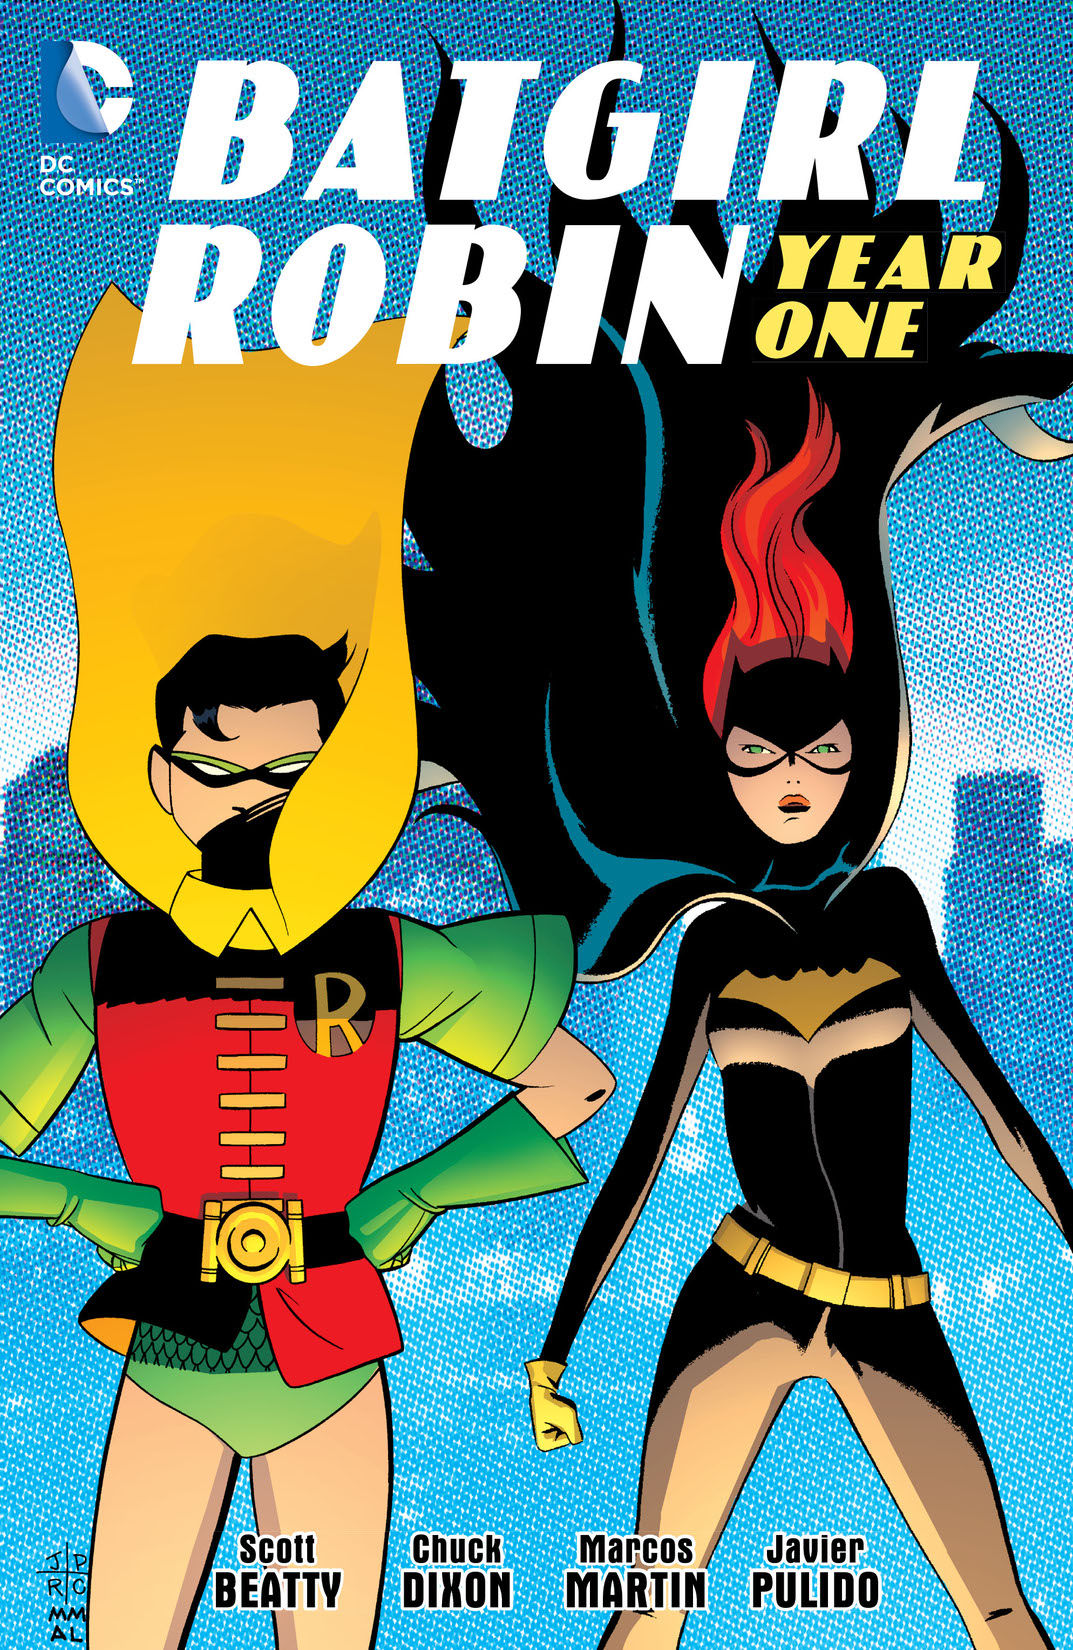 Batgirl/Robin Year One preview images